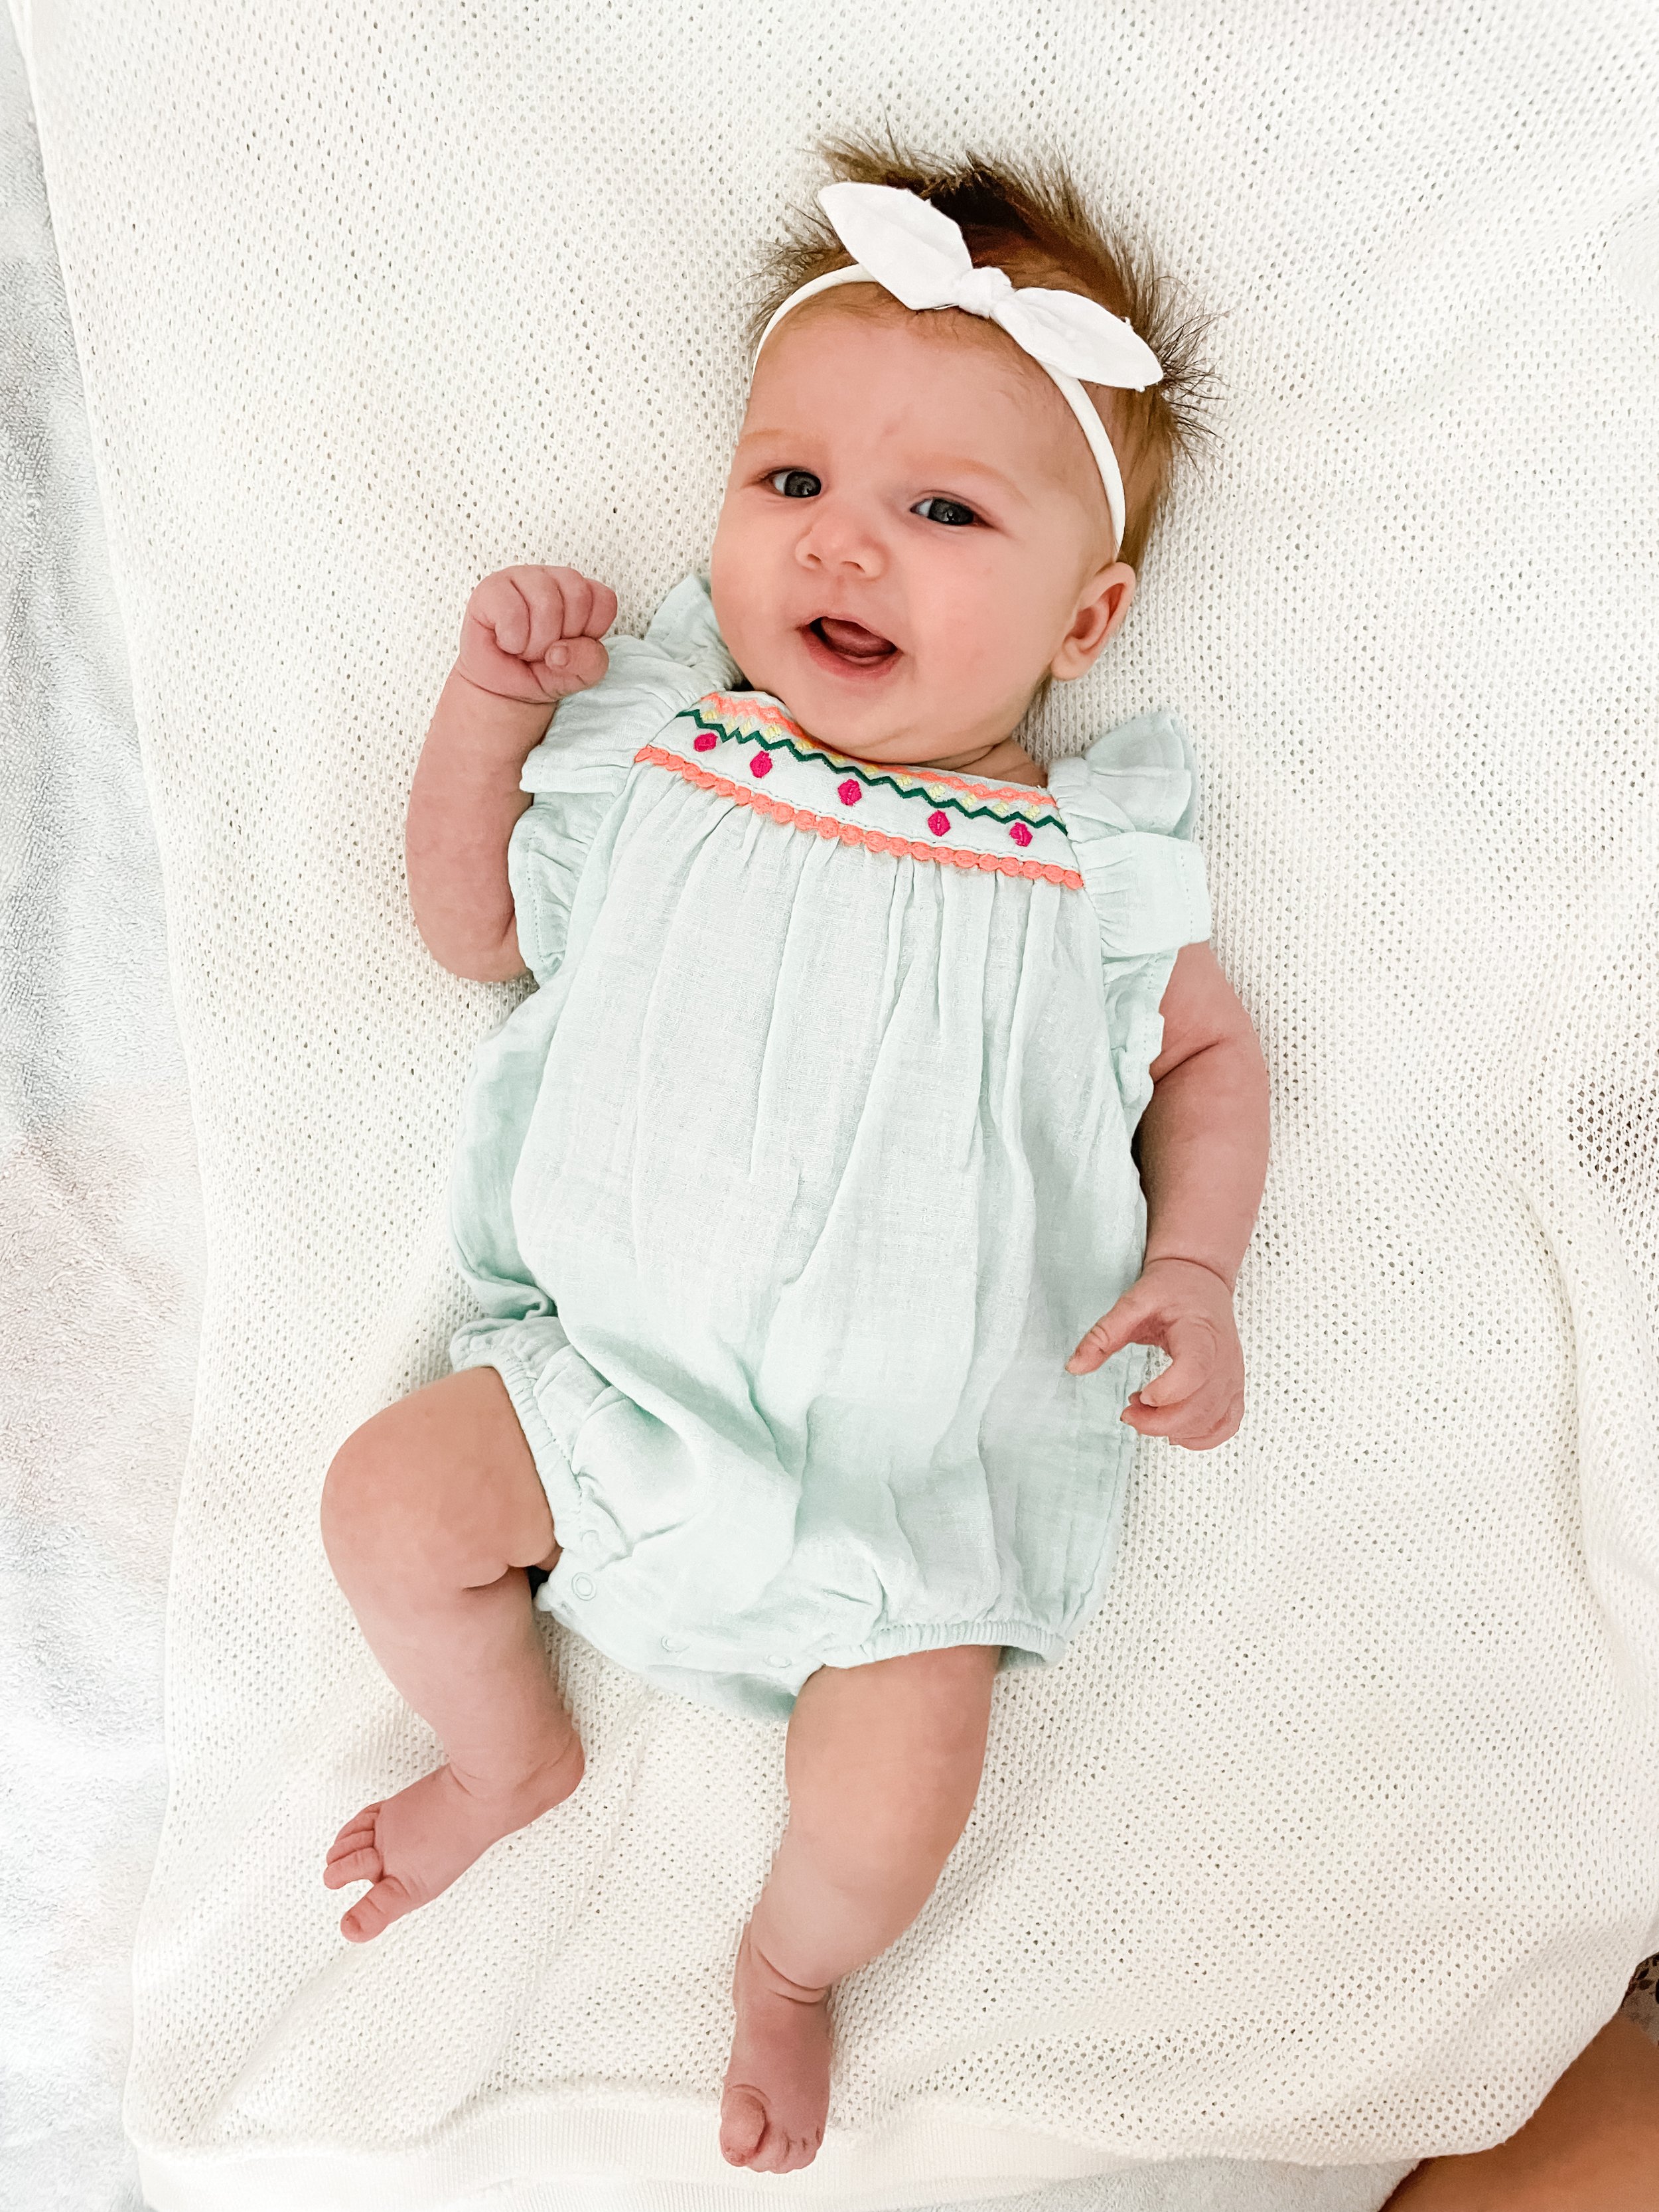 Baby Style: Cute Outfits Summer! | Simple Modest